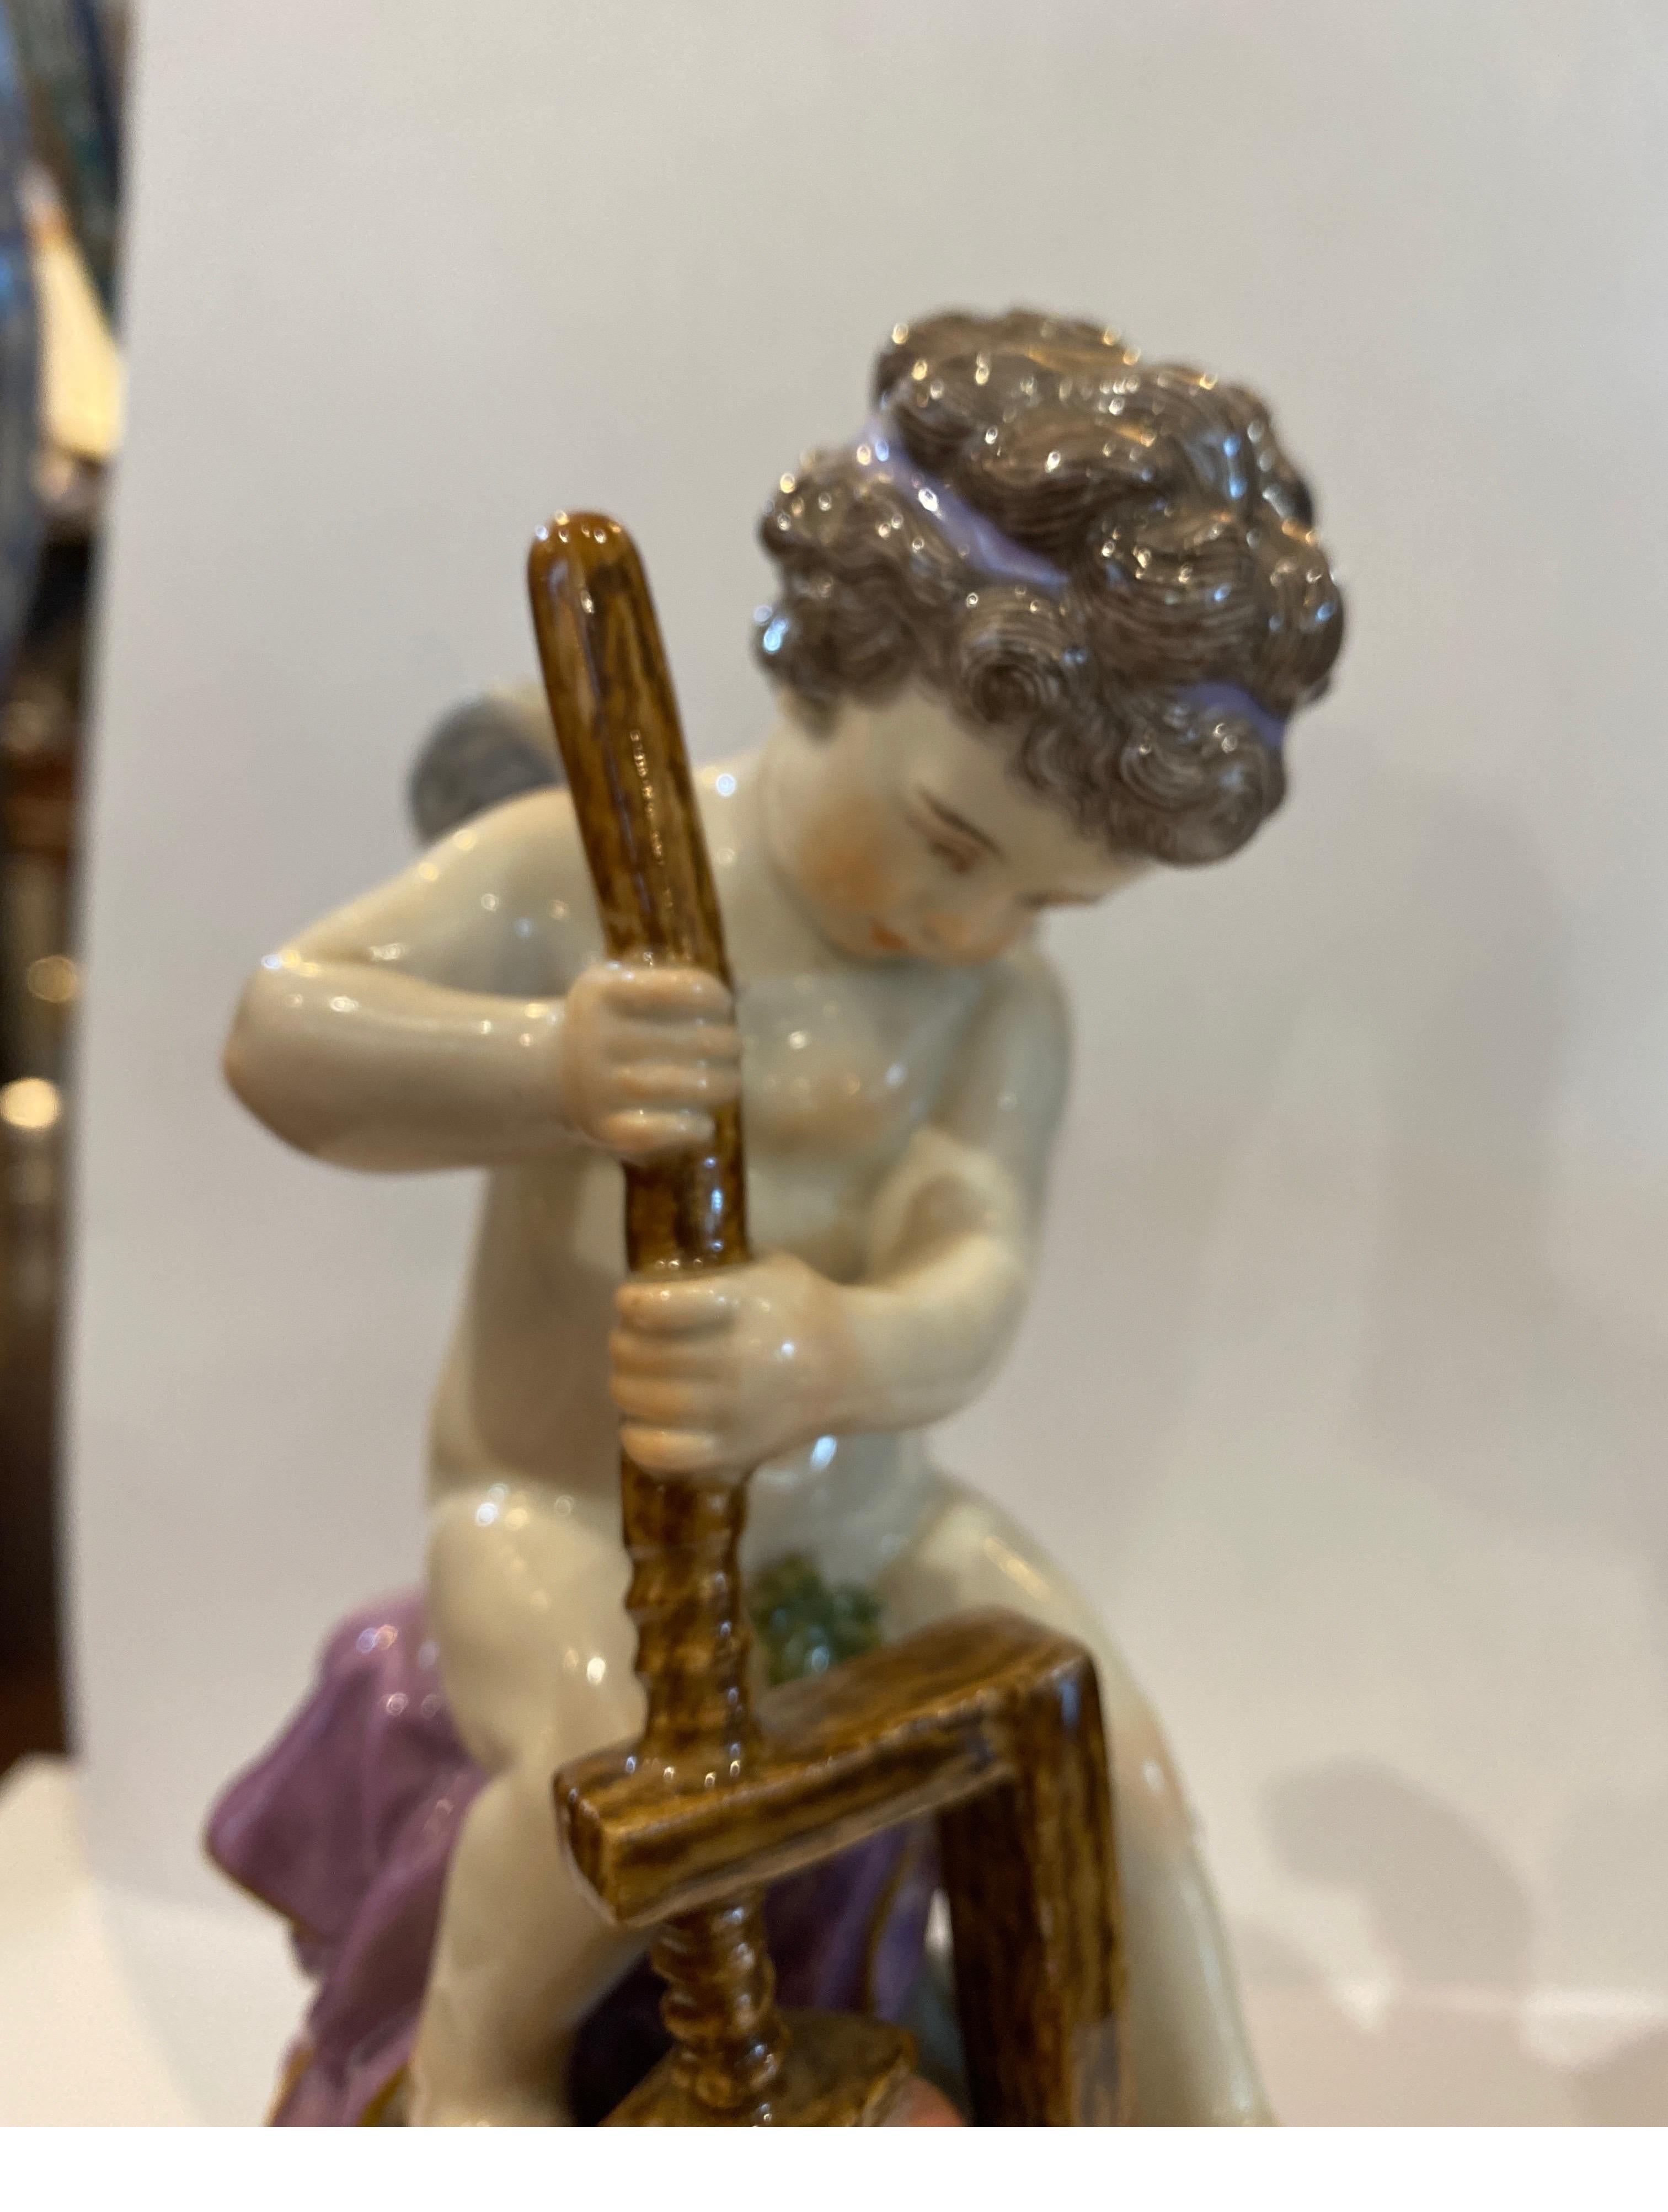 19th Century Meissen porcelain figure modeled to show the young putti with a cheese press, sat on a naturalistic rocky outcrop raised on circular base. Underglazed crossed swords mark and incised mark L107 to underside of base.
The mark with